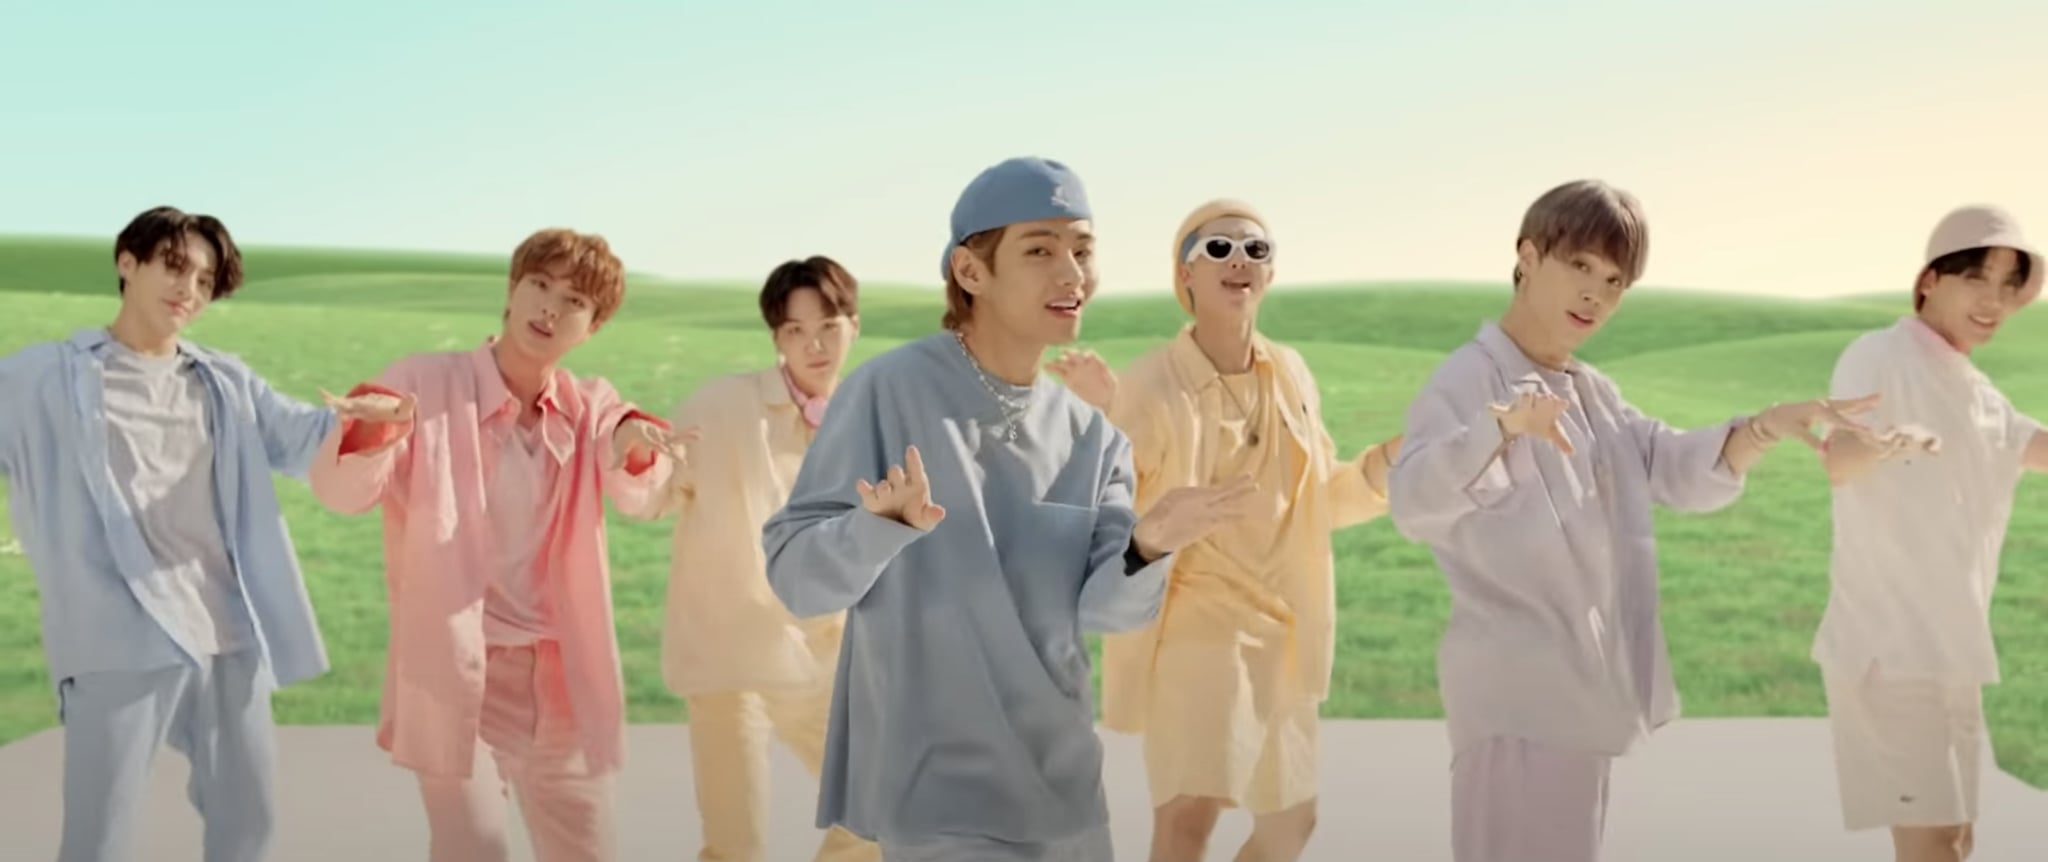 See Bts S Dreamy Dynamite Music Video Outfits Popsugar Fashion Uk